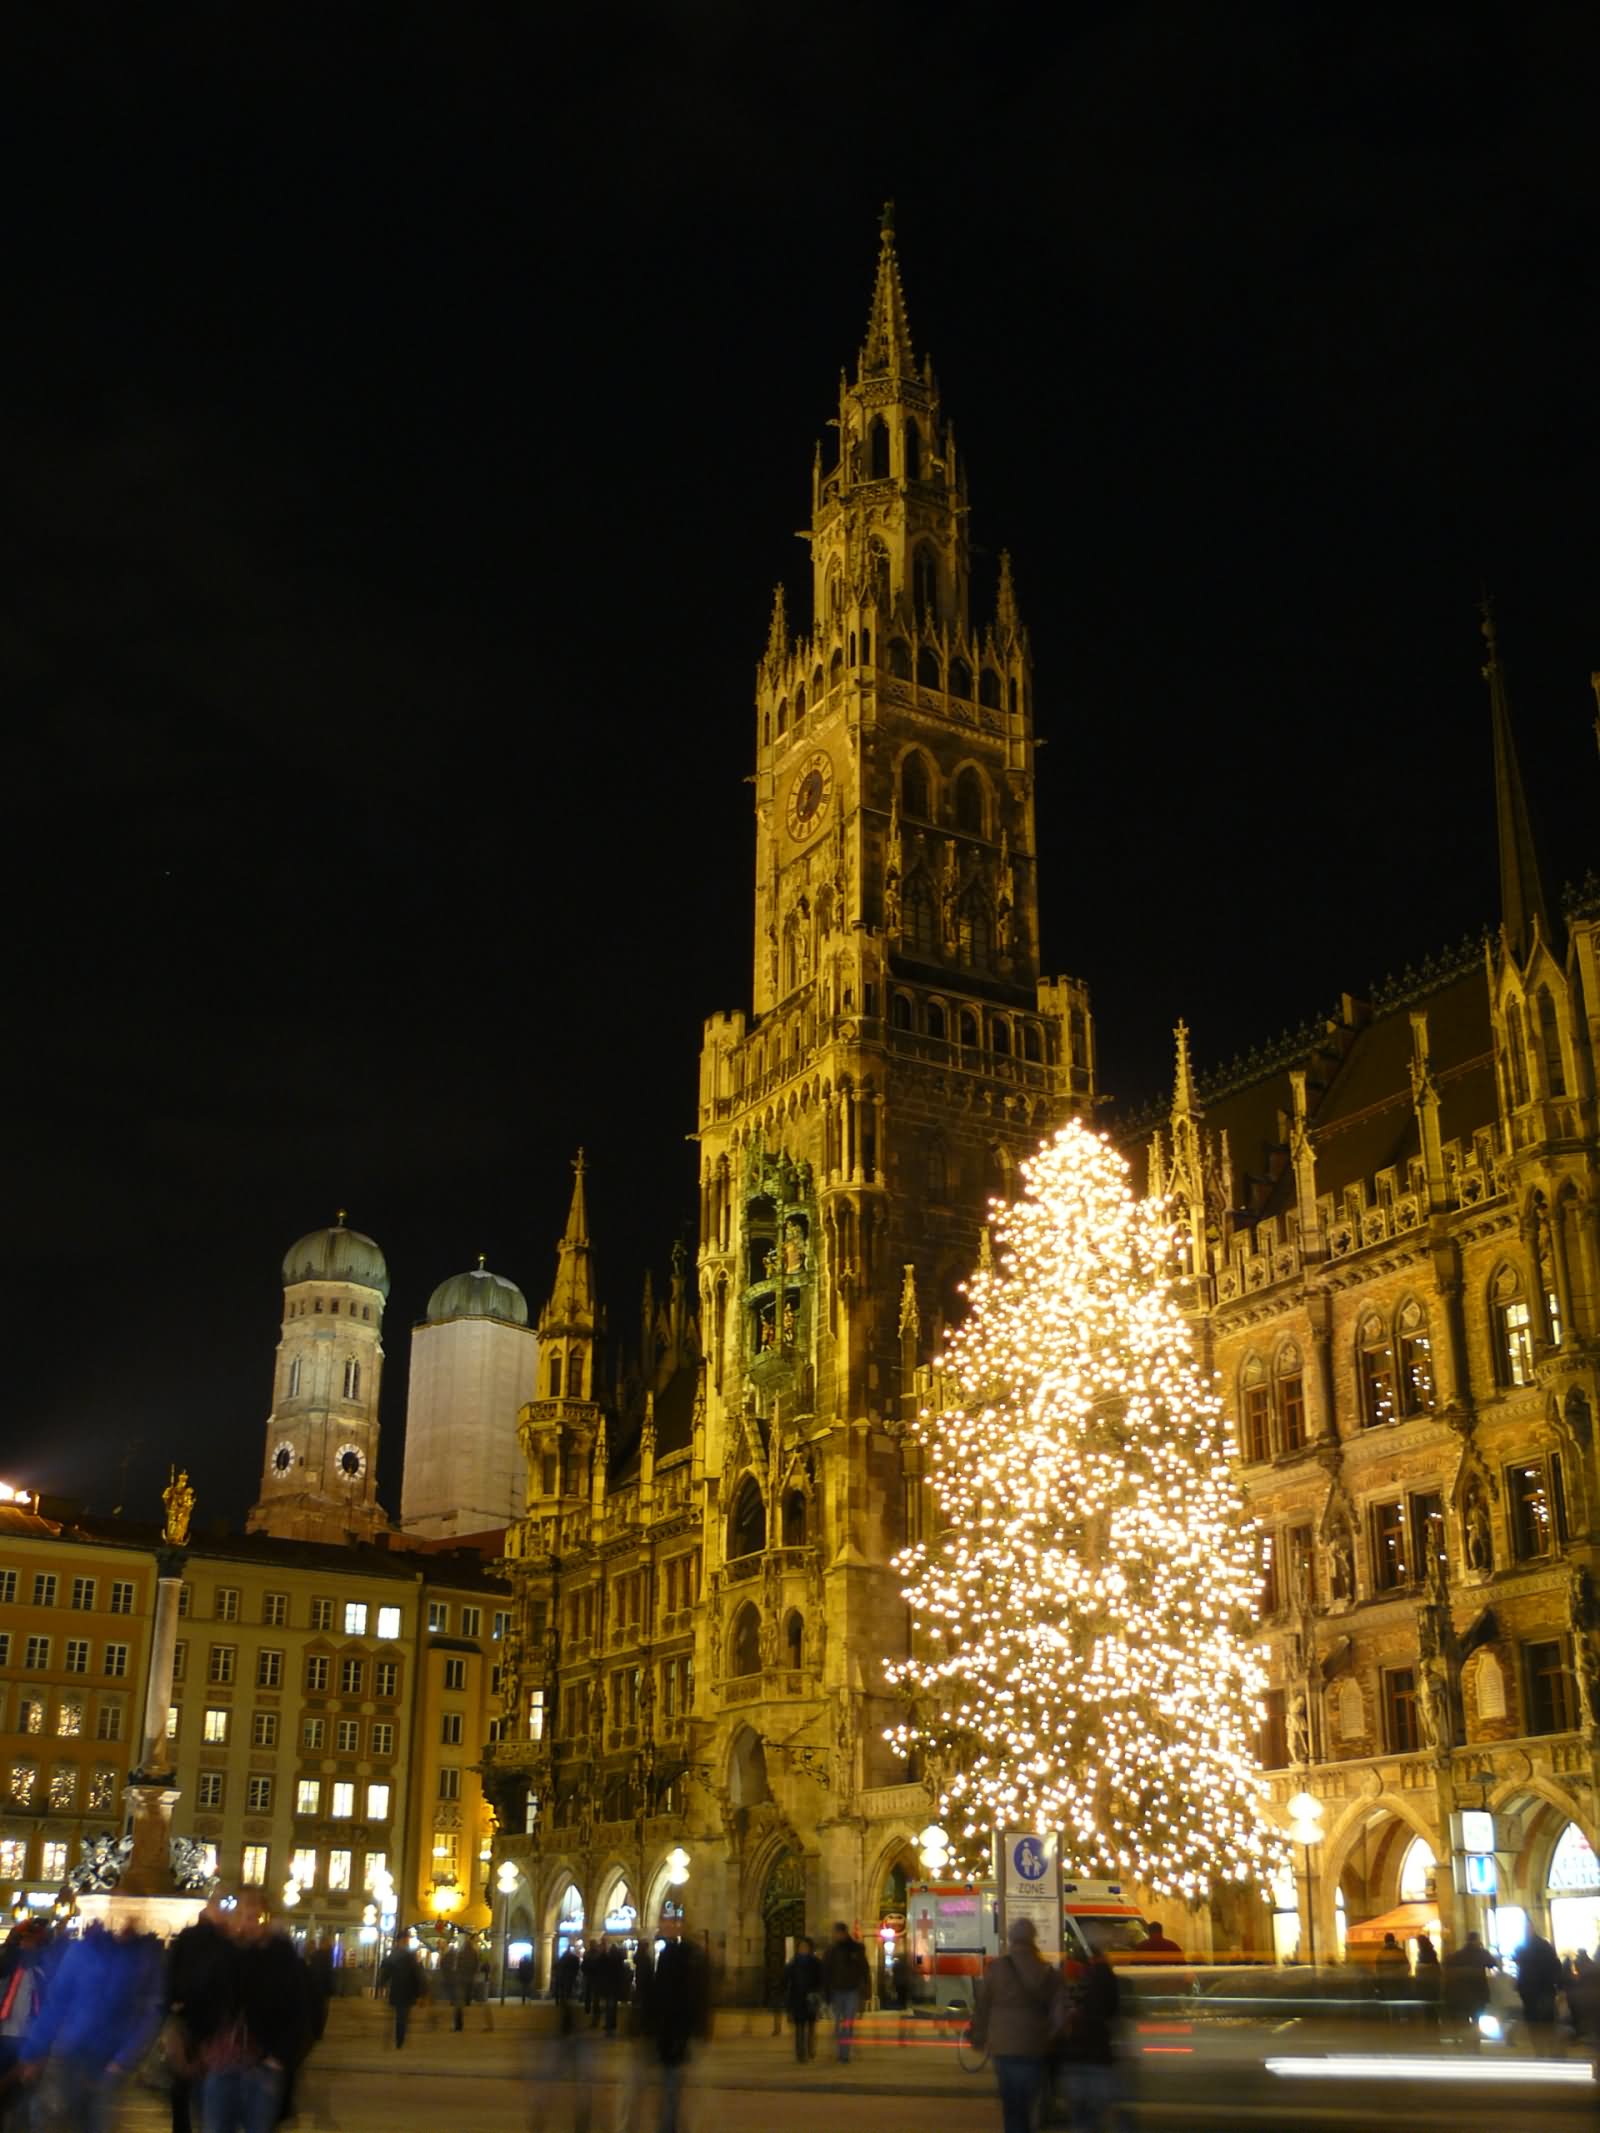 The Neues Rathaus With Illuminated  Christmas Tree At Night